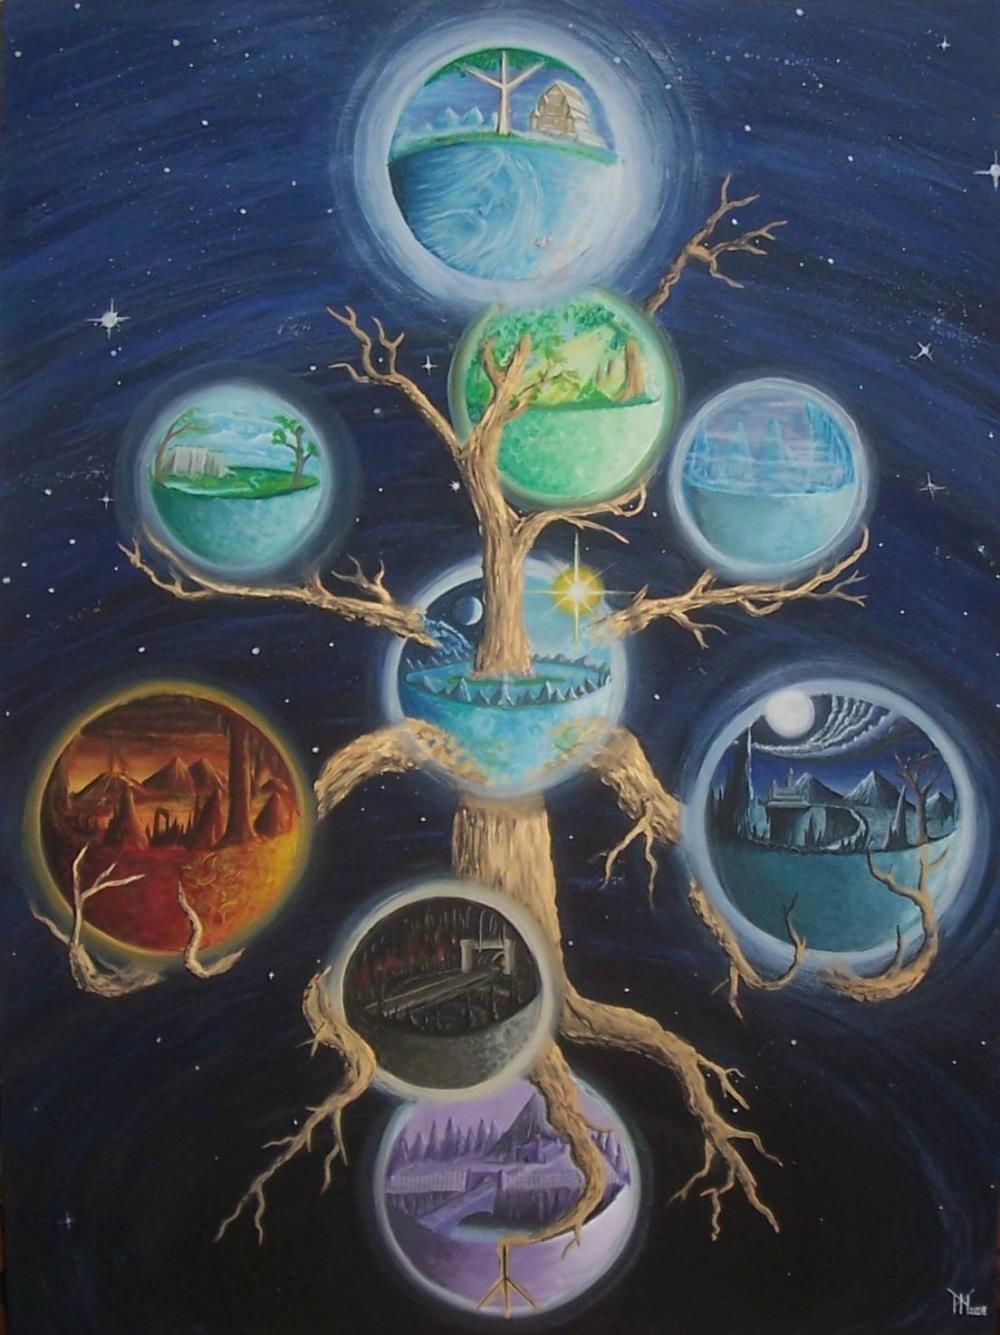 According to tradition, the nine realms or worlds are branches